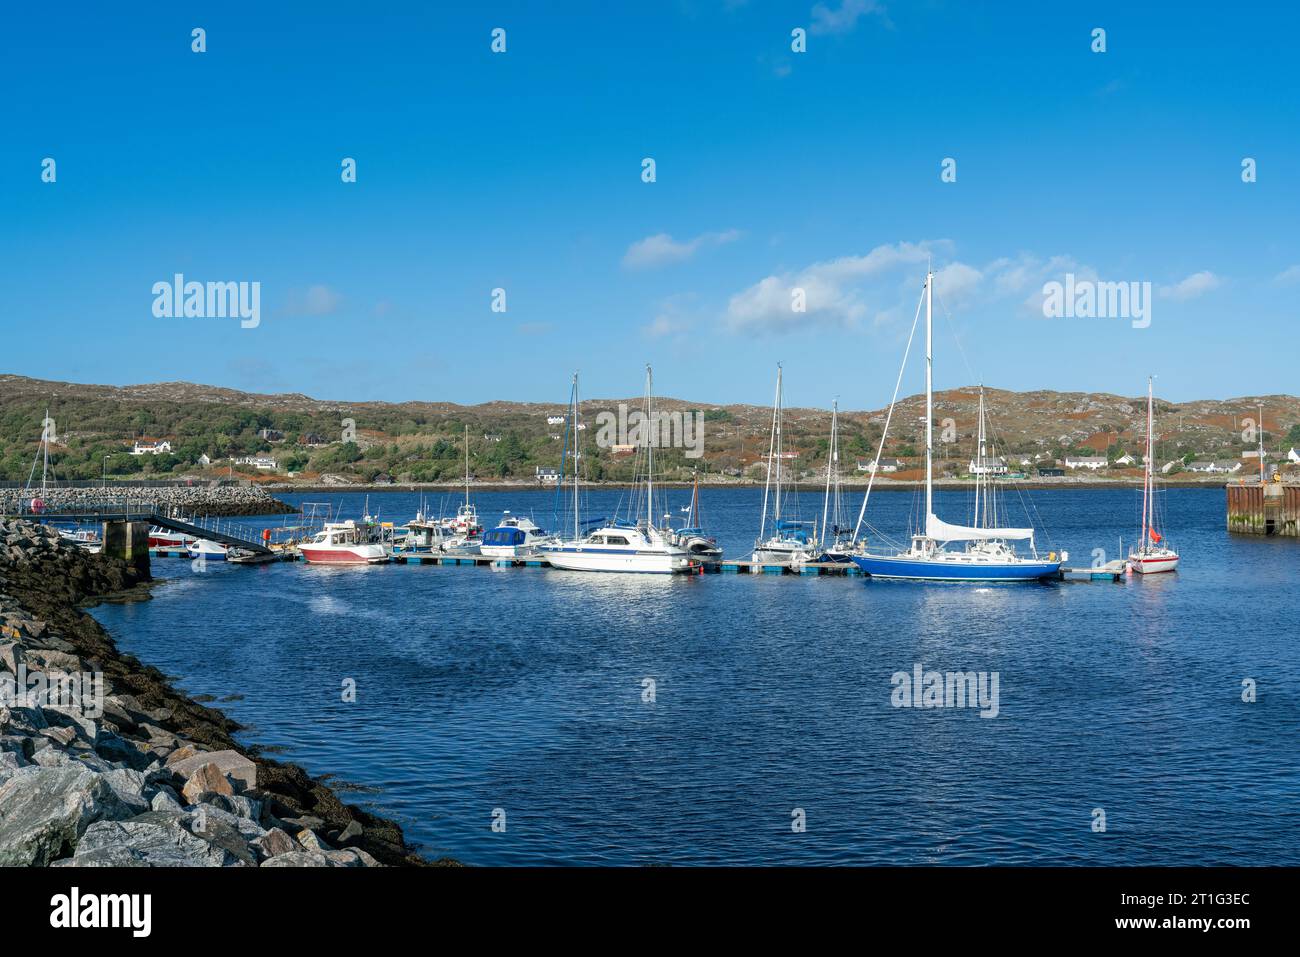 A view overlooking Lochinver harbour in scotland Stock Photo